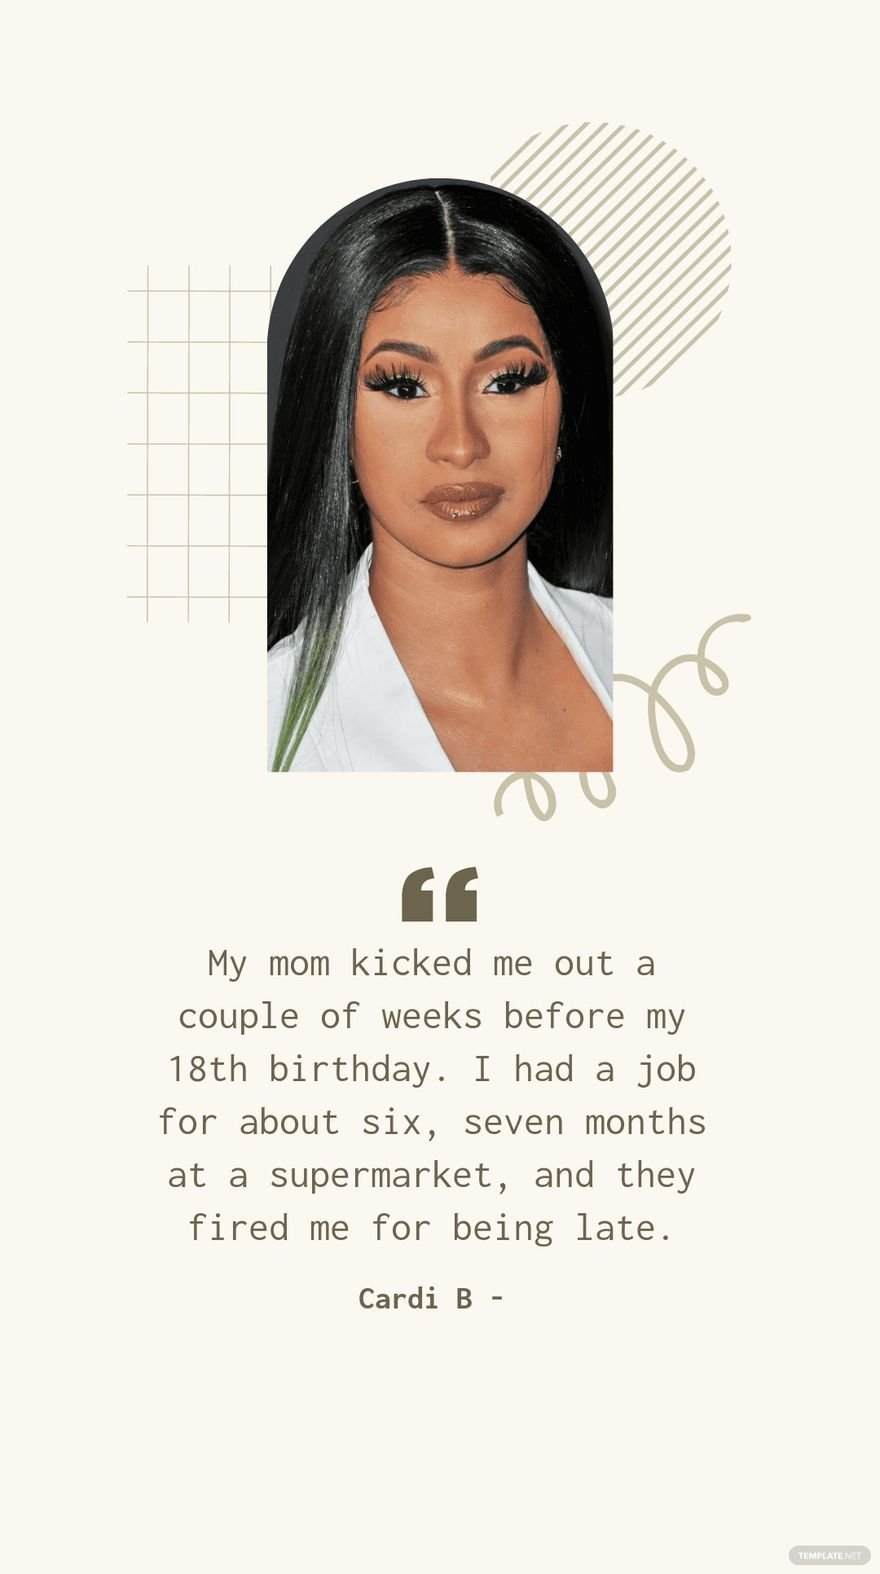 Free Cardi B - My mom kicked me out a couple of weeks before my 18th birthday. I had a job for about six, seven months at a supermarket, and they fired me for being late.